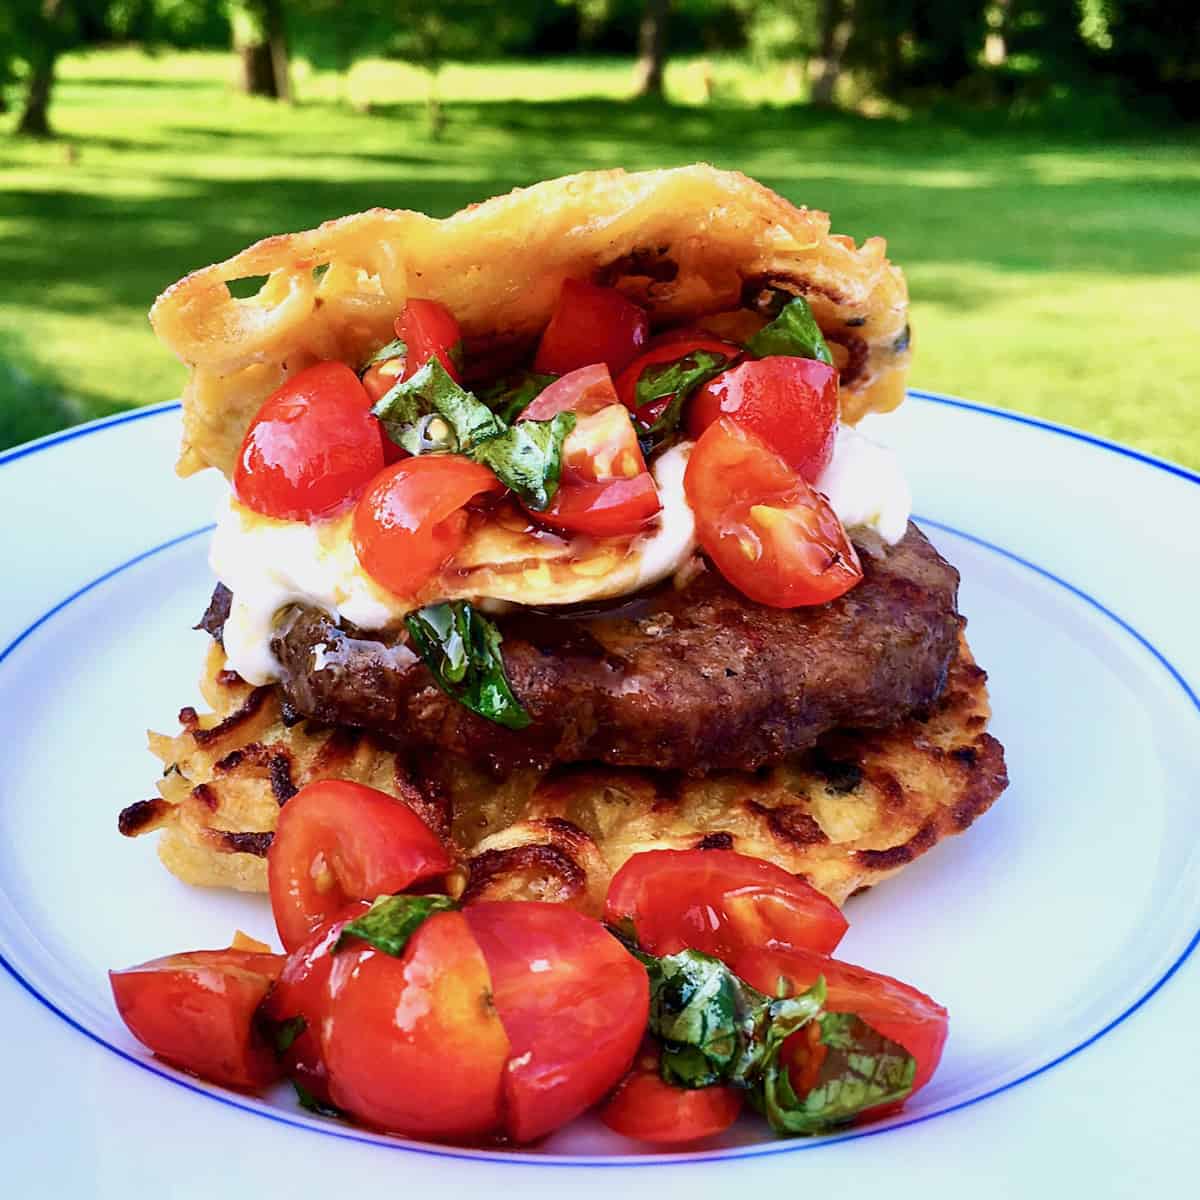 Yakisoba noodle bun burger with tomatoes and cheese.